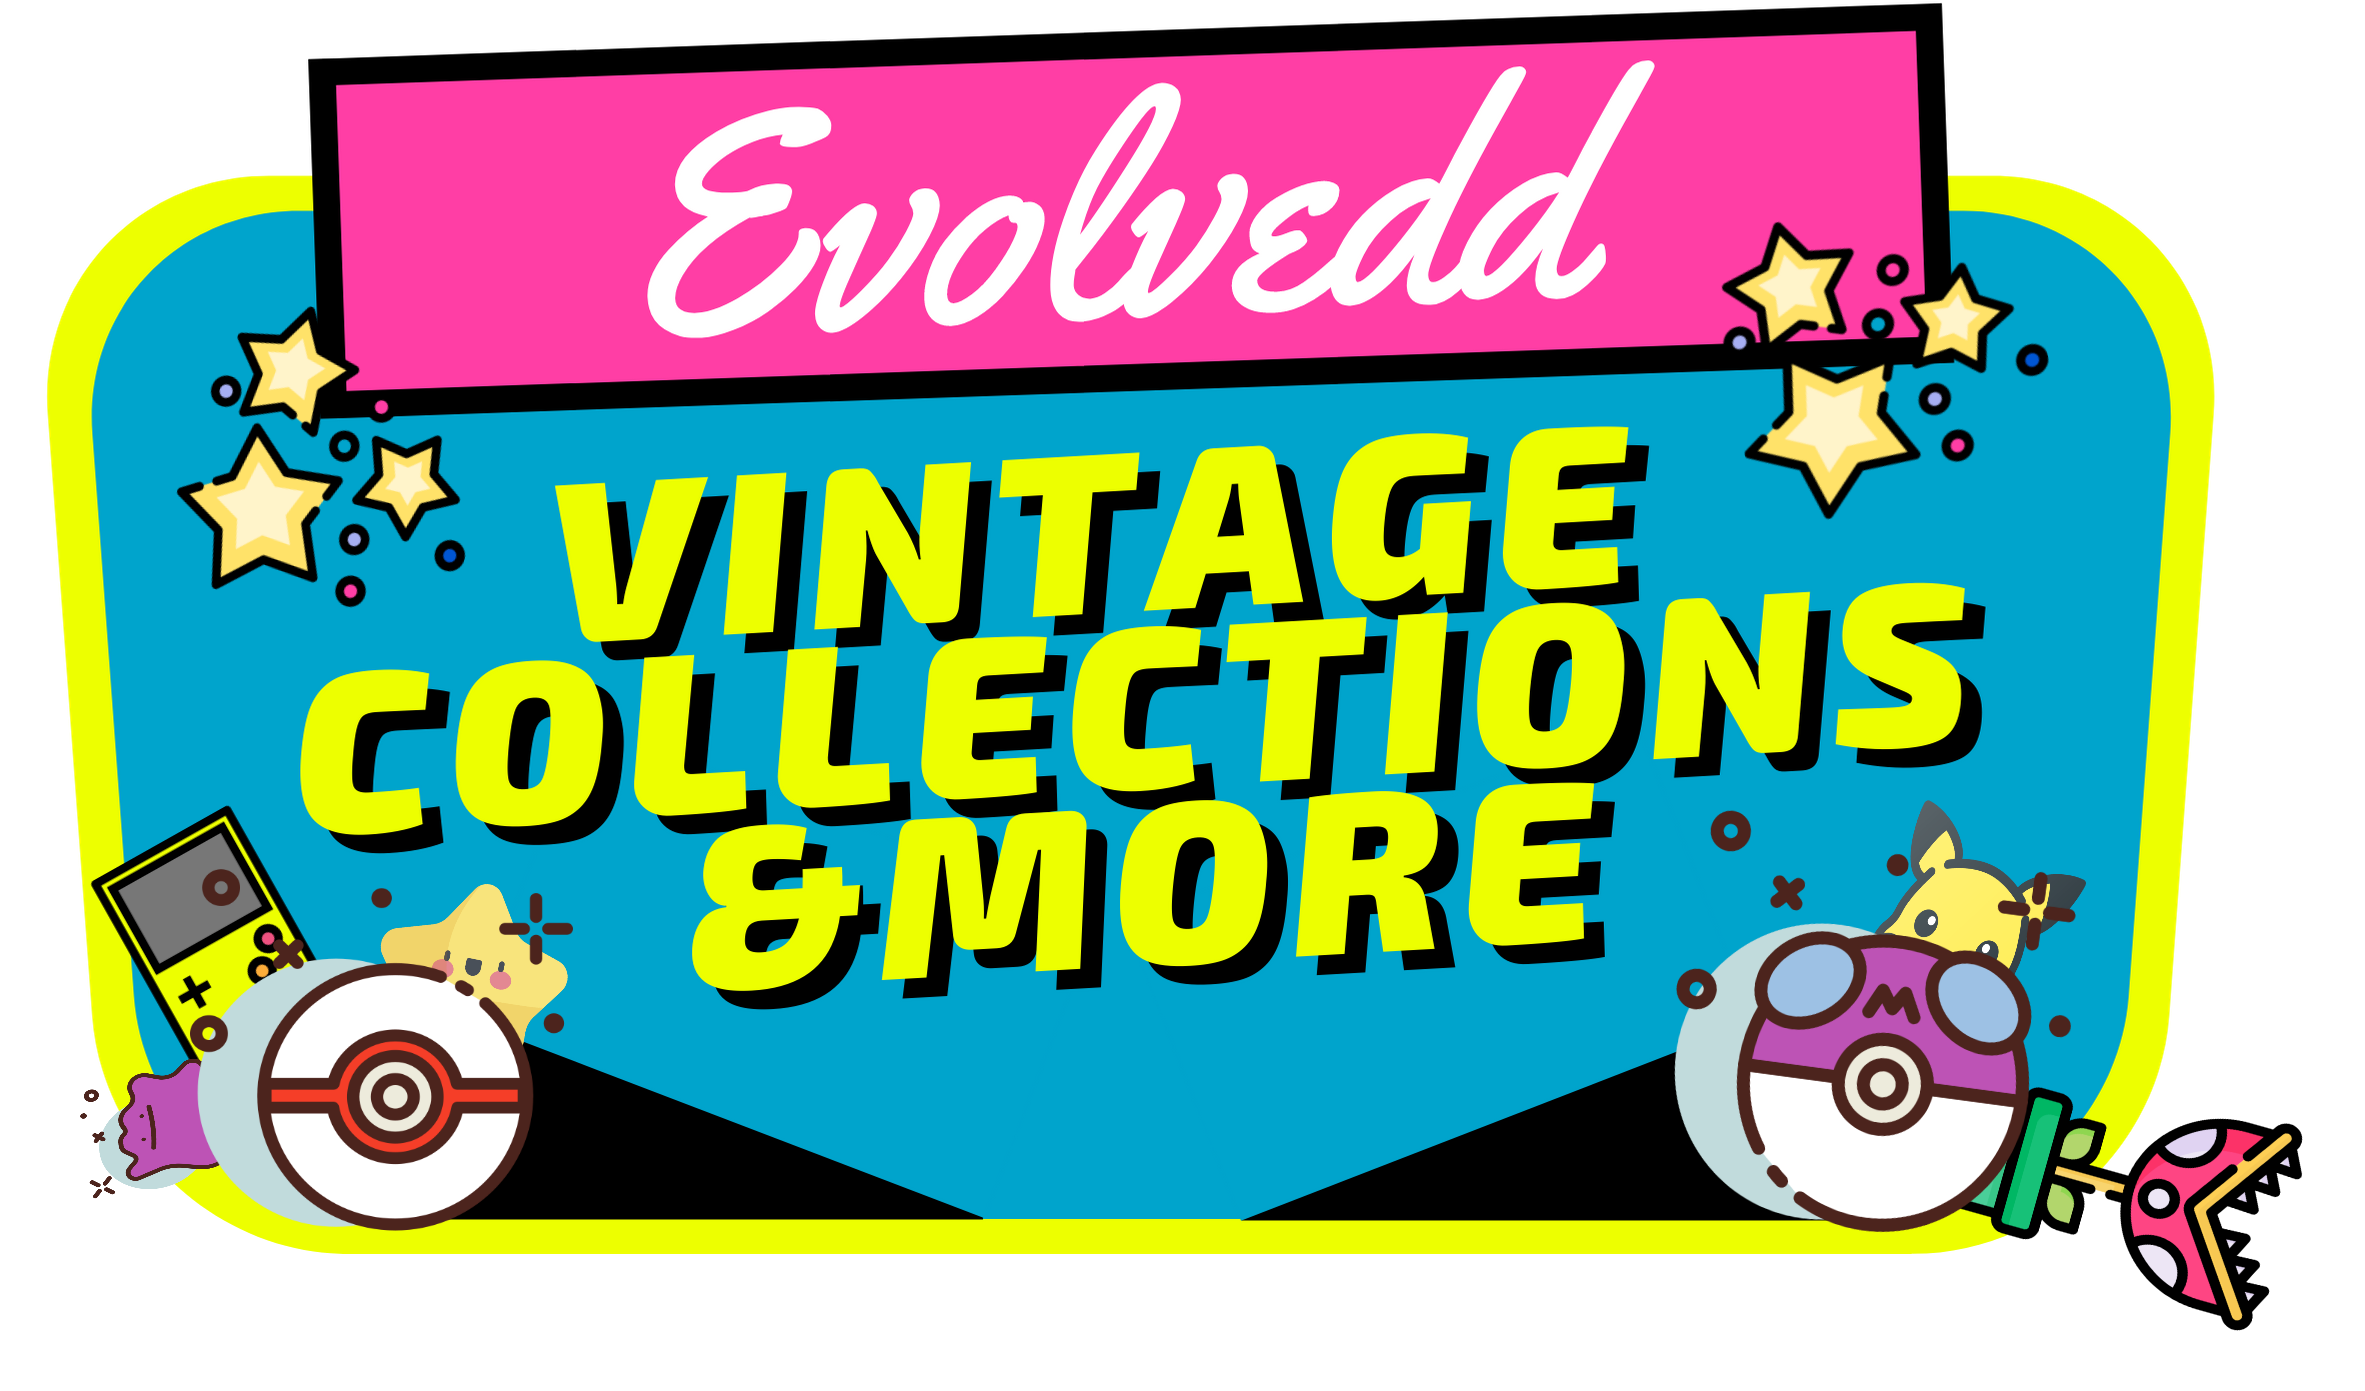 Evolvedd Collections